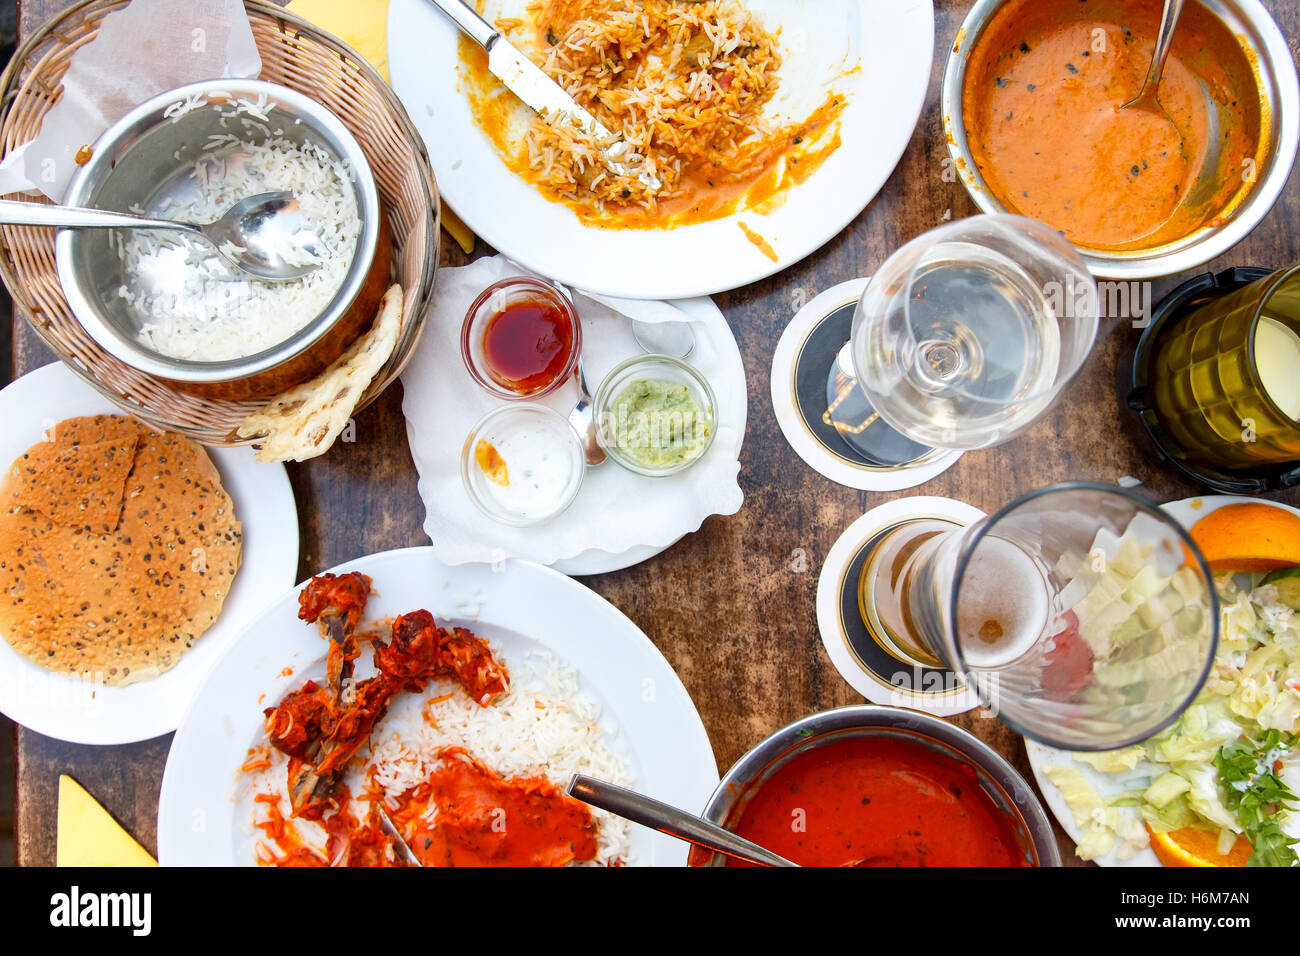 Plates of Indian food leftovers on wooden table from above. Stock Photo